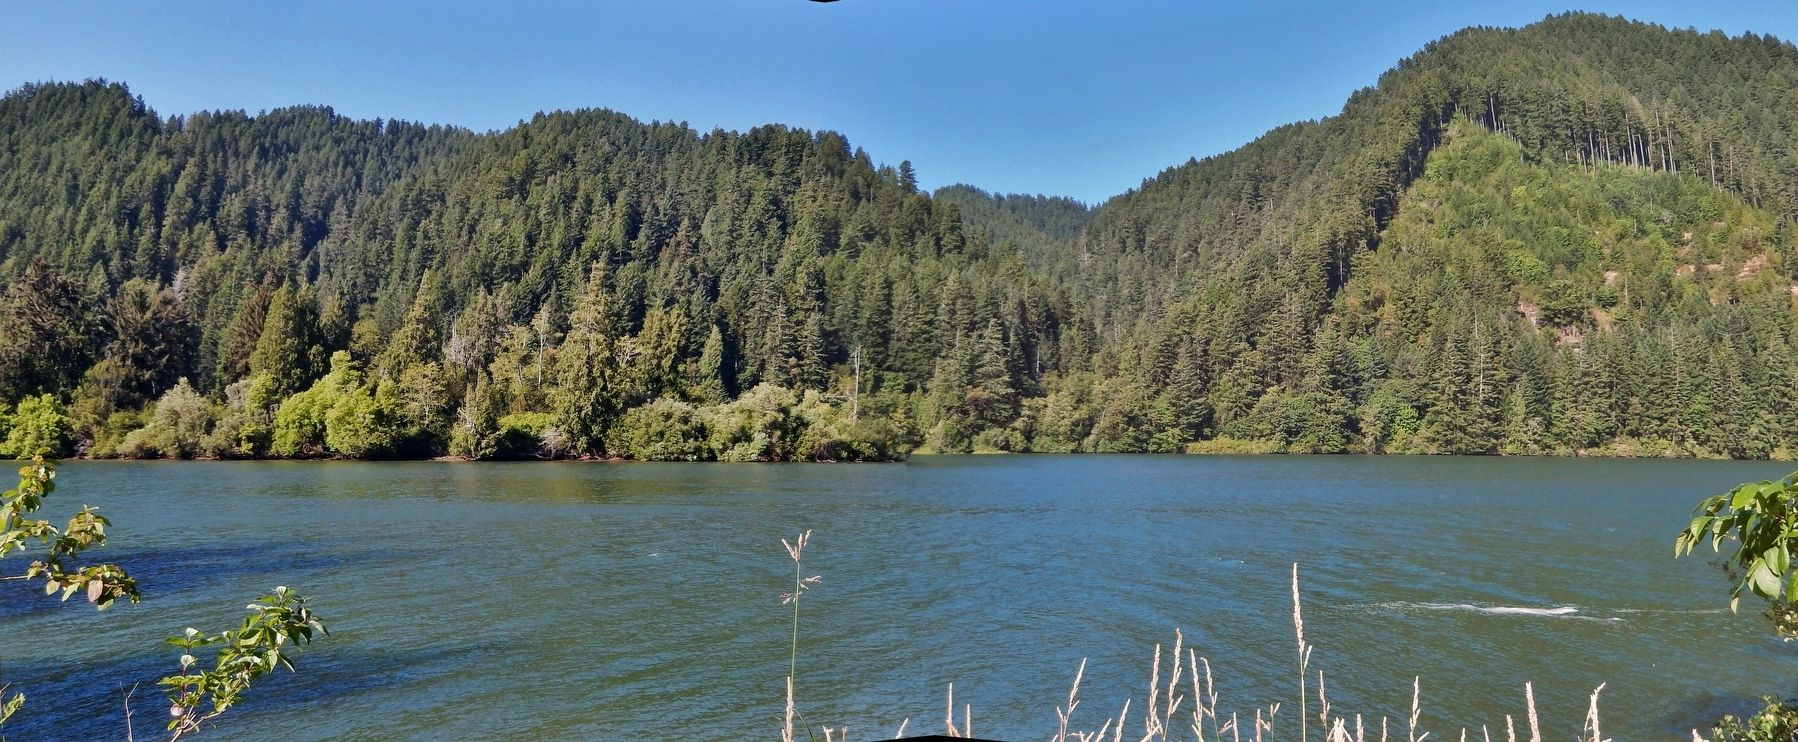 Brandy Bar Island (<i>view north across Umpqua River from the marker</i>) image. Click for full size.